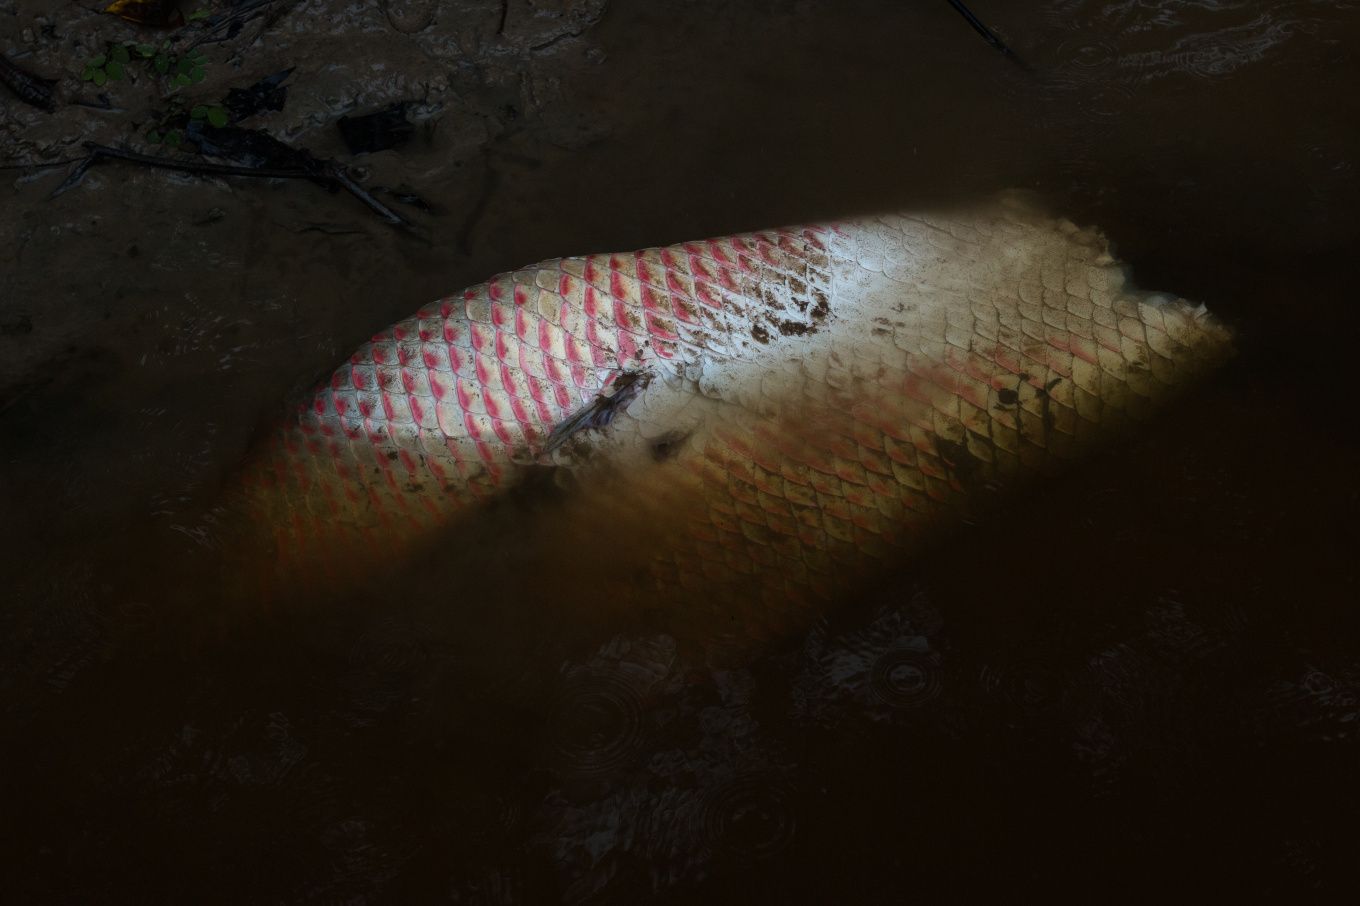 The paiche is the largest scaled freshwater fish in the world. Image by Felipe Luna. Bolivia, 2018.